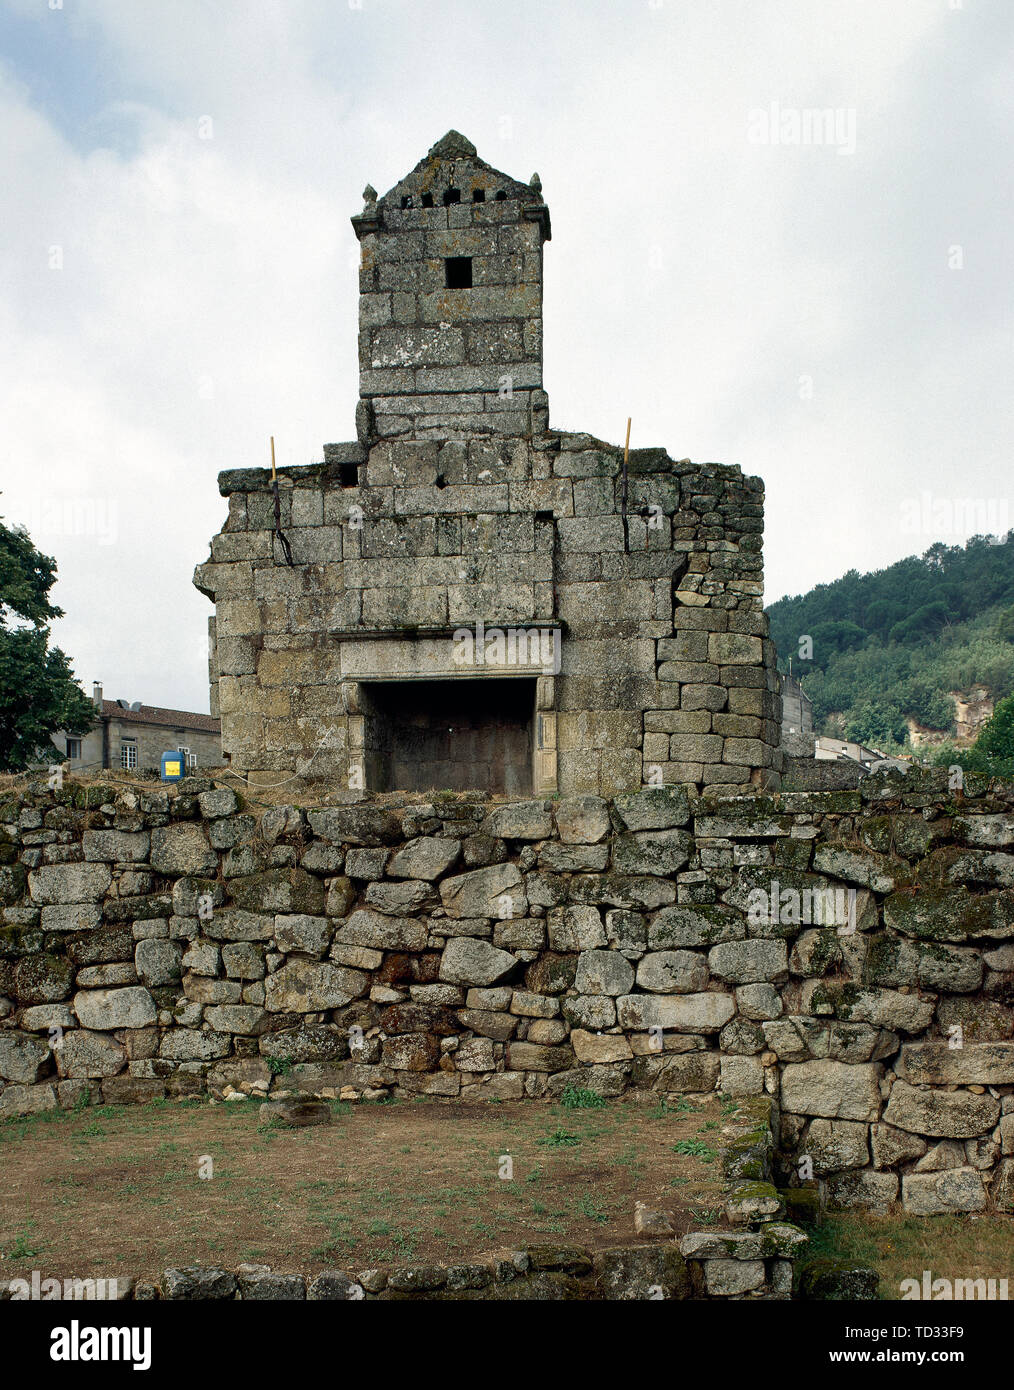 Spain. Galicia. Ribadavia. The Castle of the Earls of Sarmiento. It was built in the middle of the15th century. Ruins of the chimney. Stock Photo